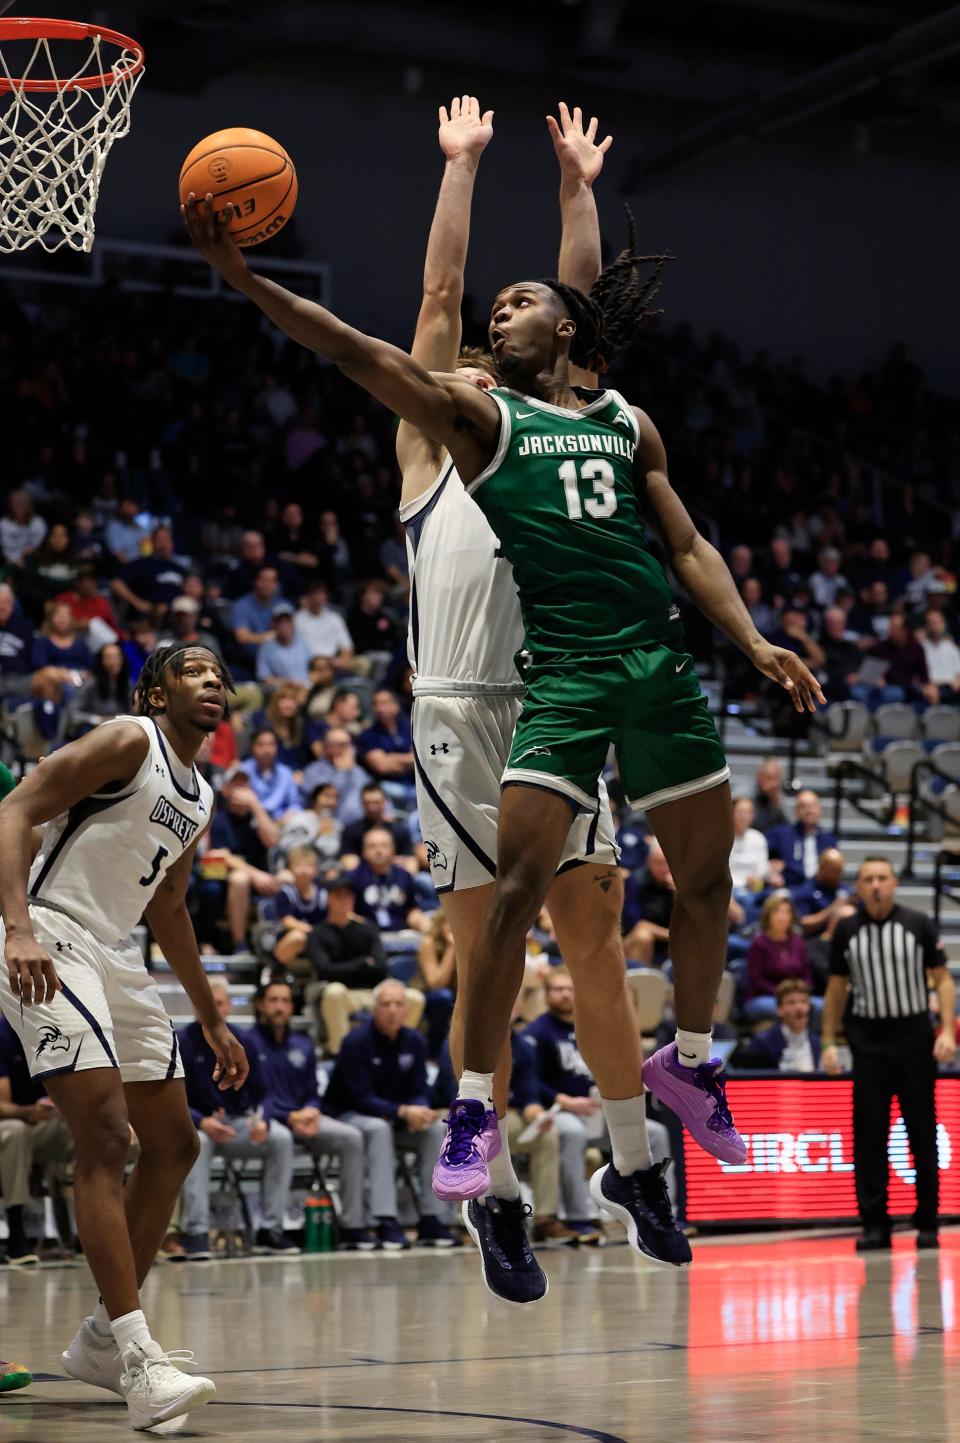 Robert McCray V and the Jacksonville University Dolphins have three conference games remaining to try and get within the top 10 of the ASUN and qualified for the post-season.